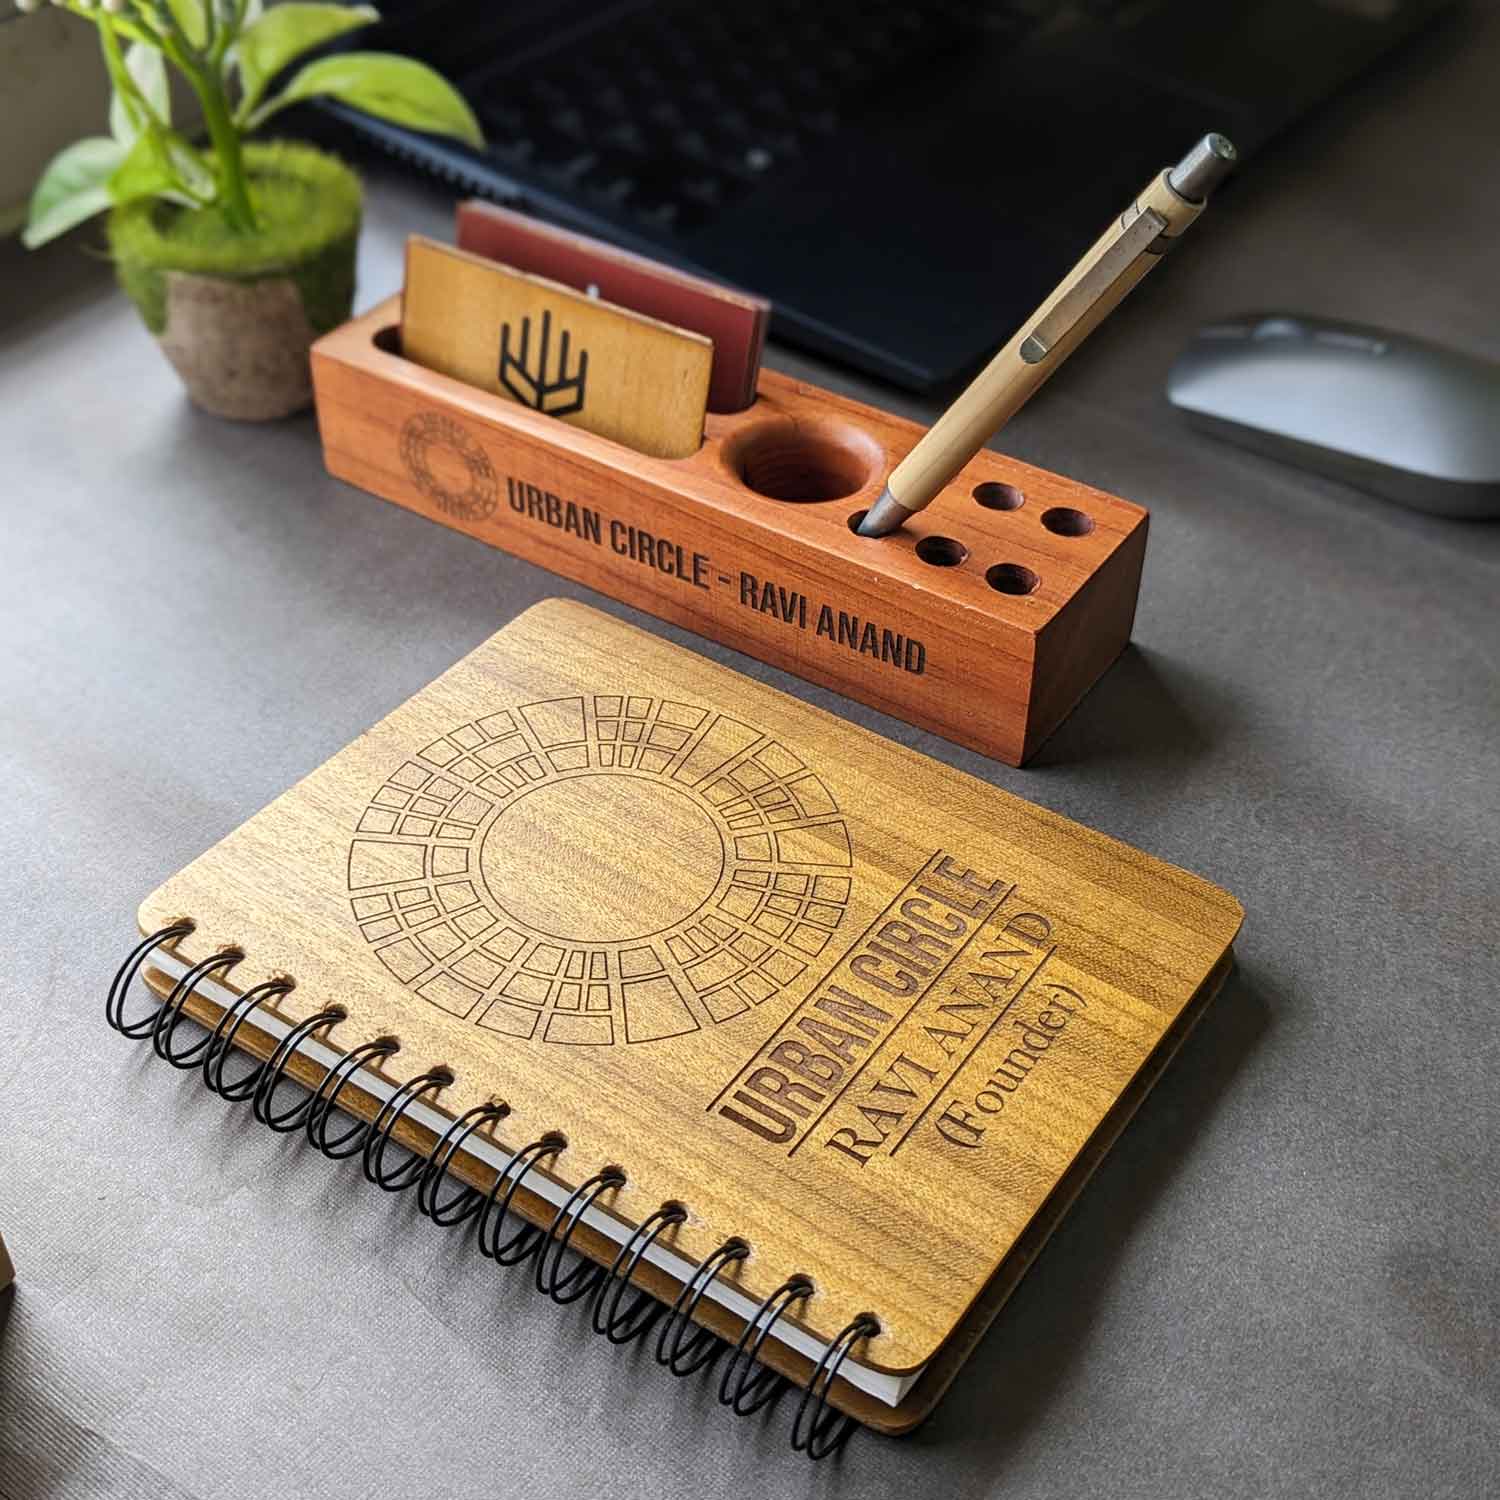 20 Amazing Corporate Gifts for Boss They Will Surely Like